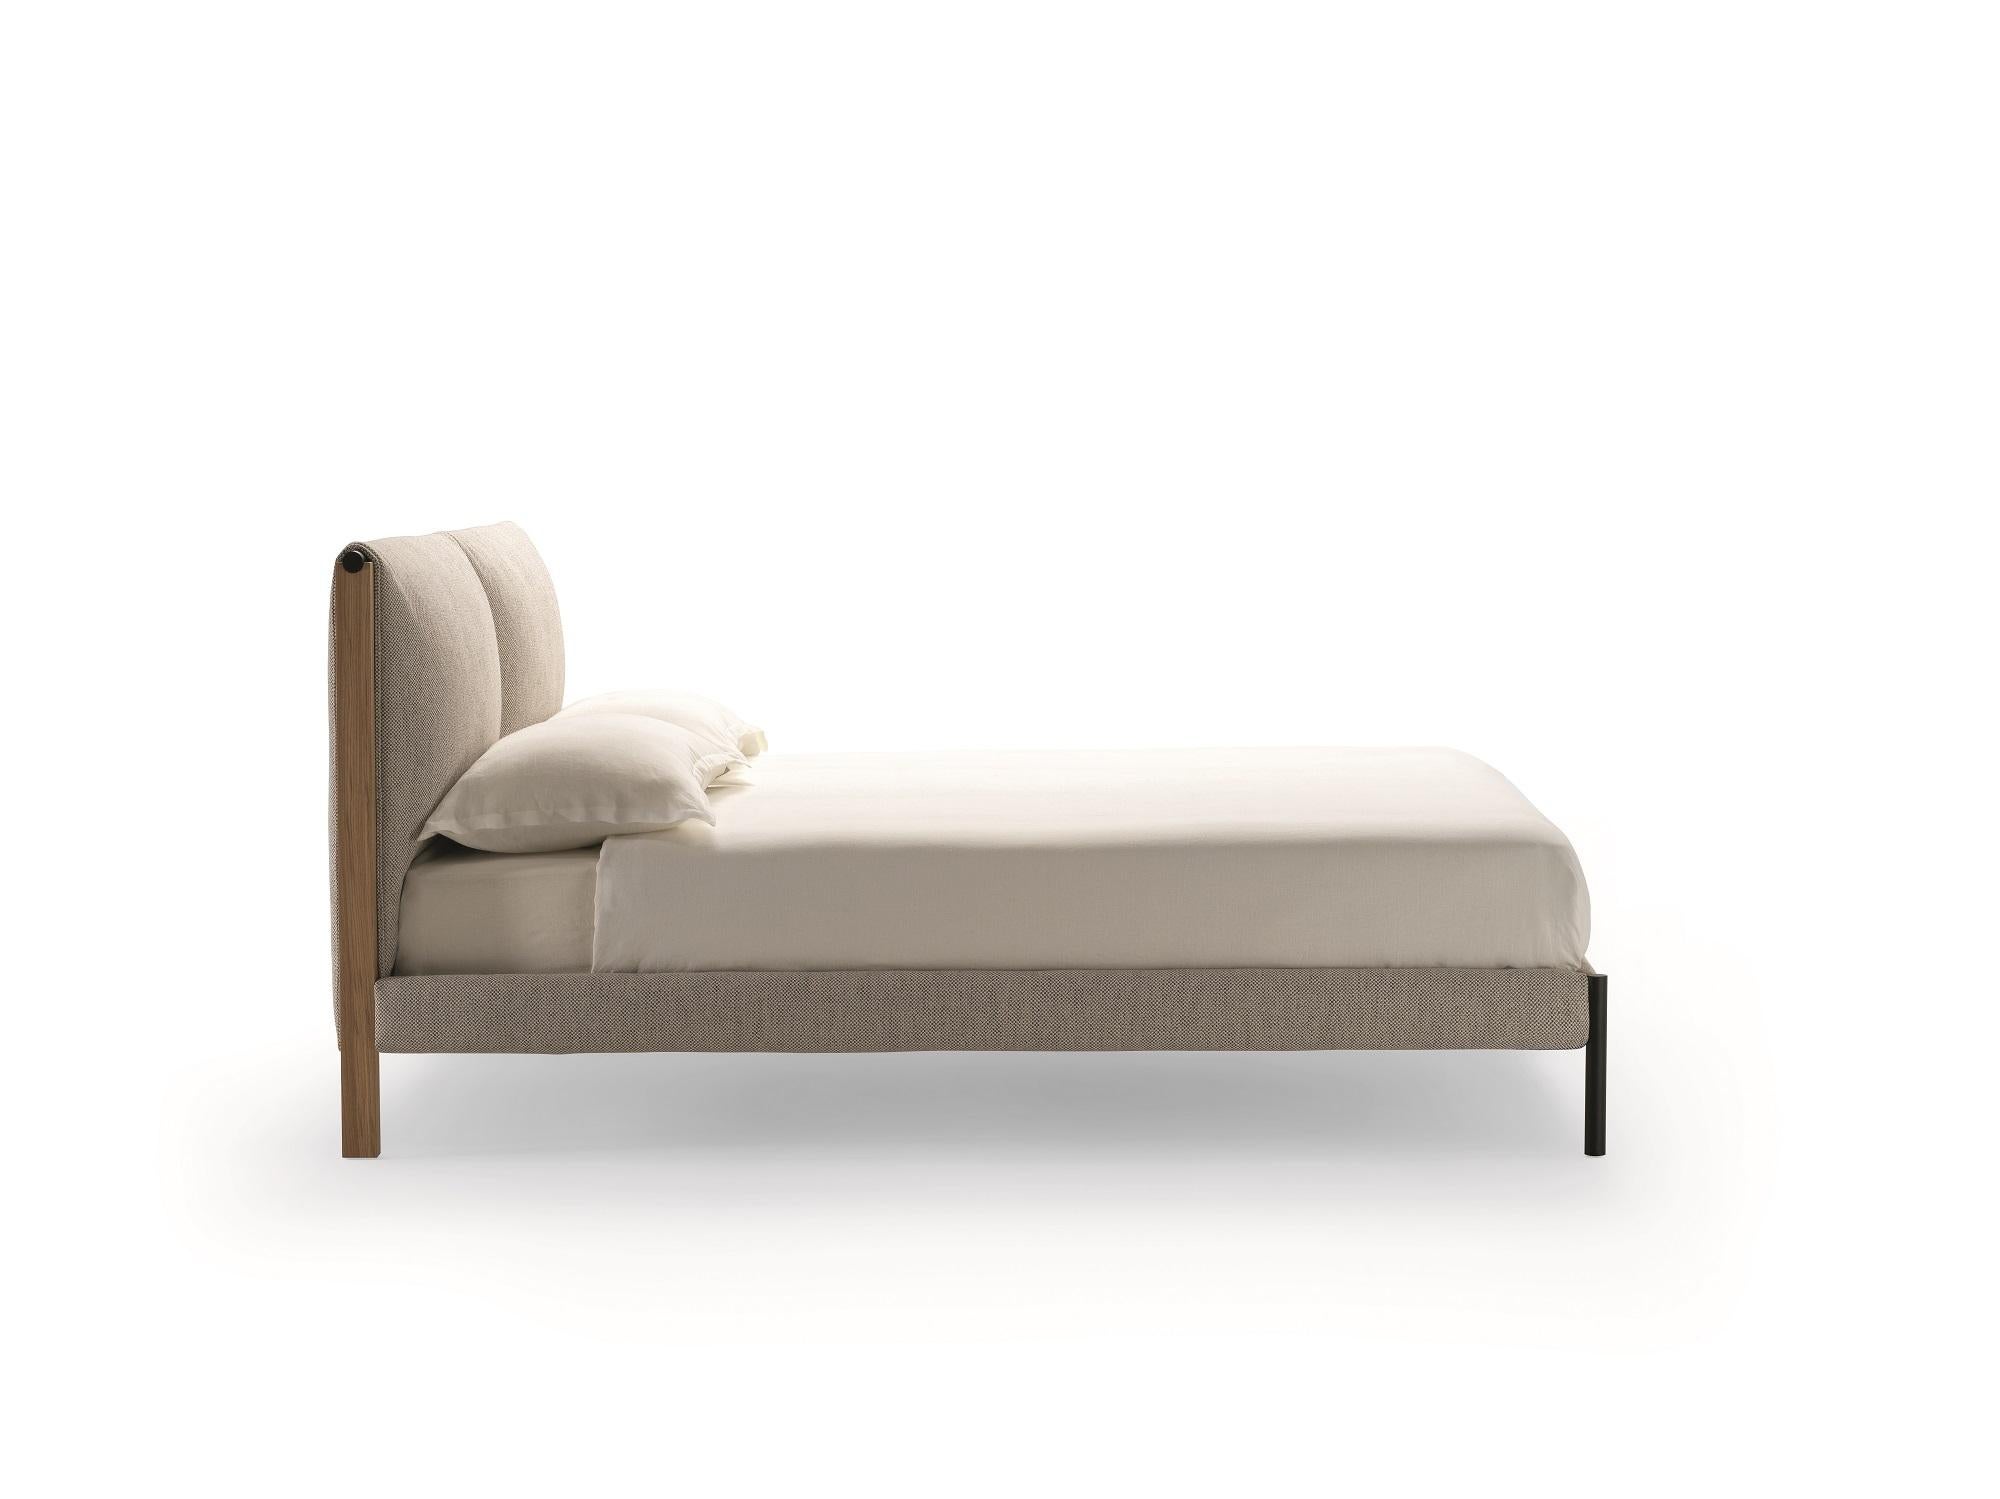 Zanotta Queen Size Ricordi Bed with Single Springing in Toce Upholstery by Spalvieri & Del Ciotto

Bed with single springing. Headboard frame in natural or in open pore black painted oak. Upholstery in polyurethane/heat-bound polyester fibre. Front